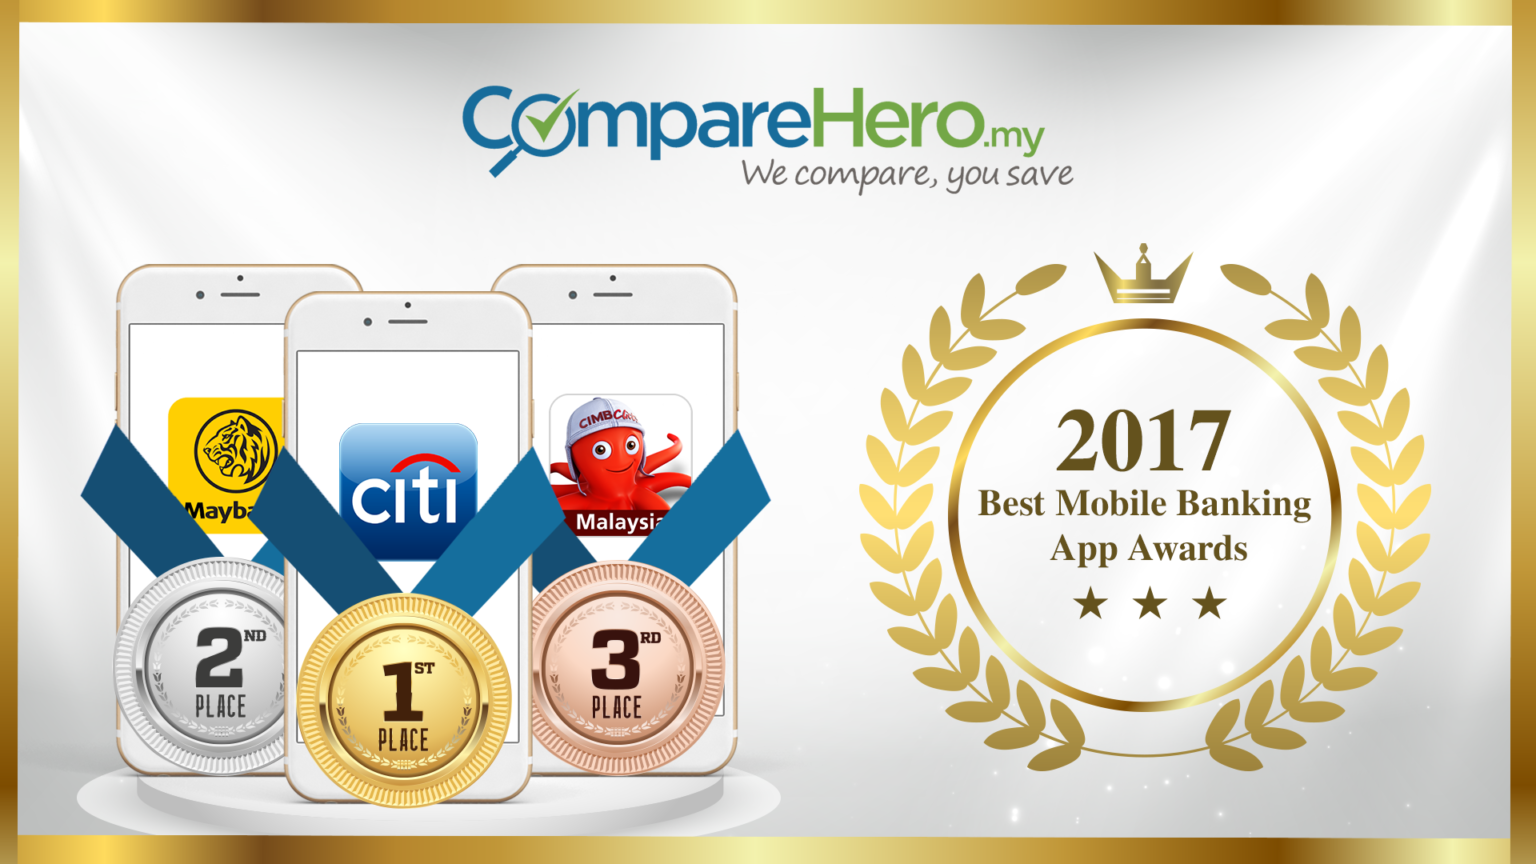 CompareHero.my 2017 Mobile Banking Apps Award Winners Announced